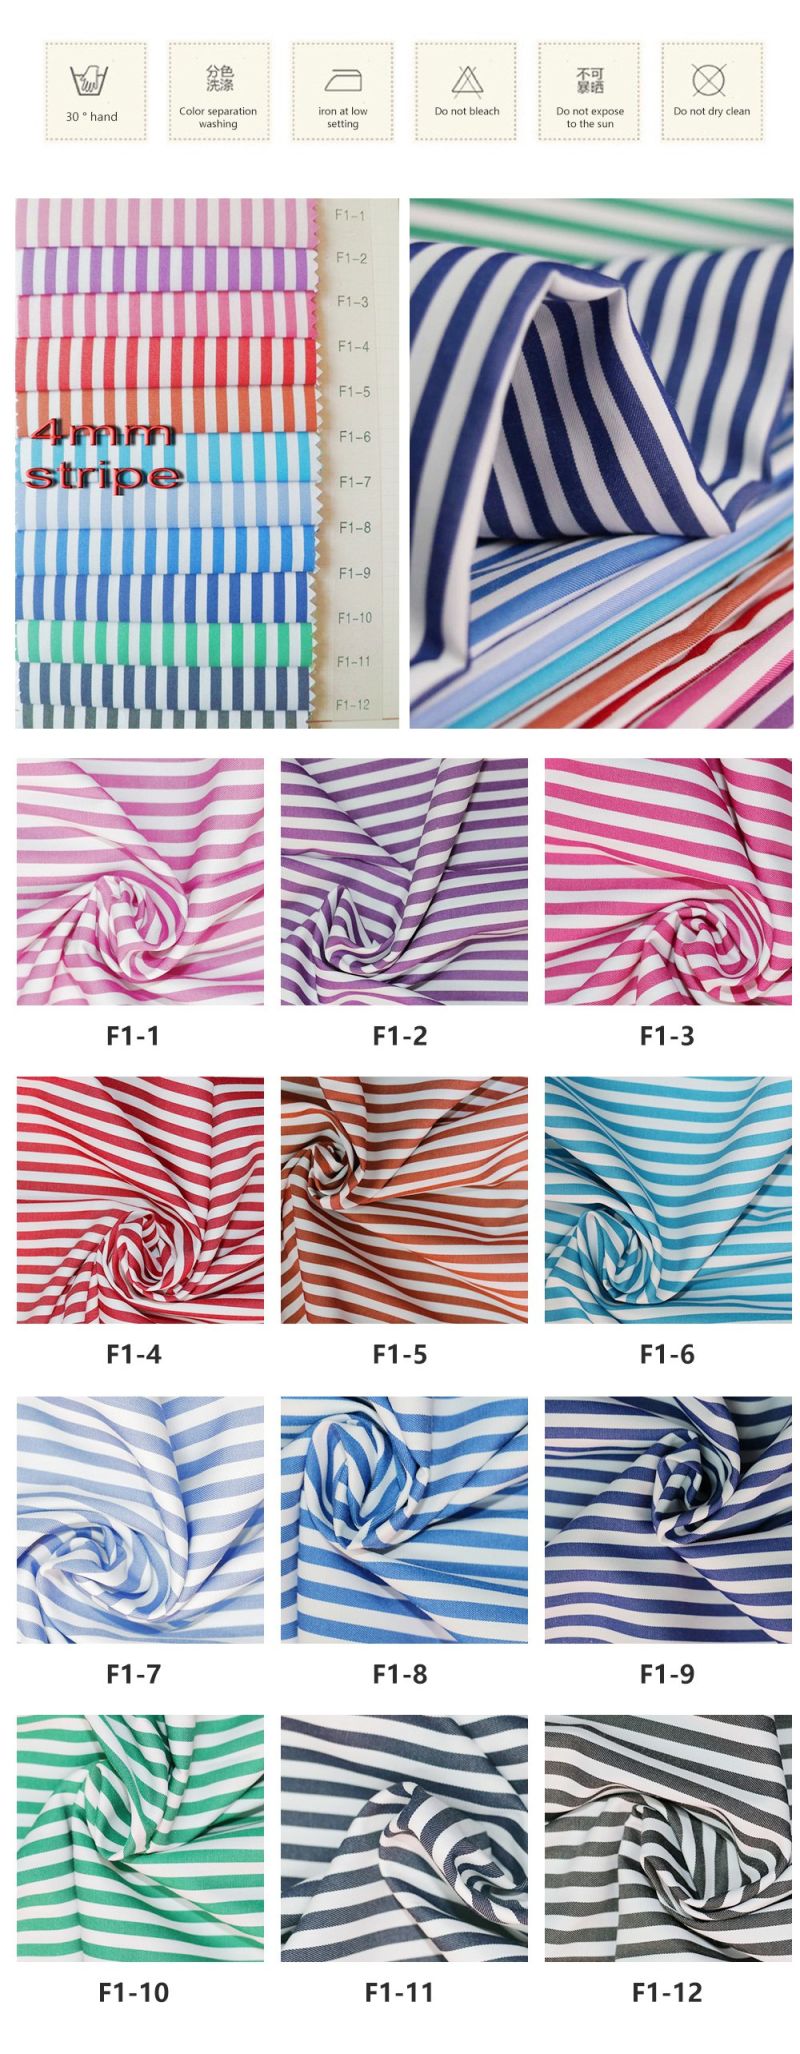 Stripe Cotton Fabric Suppliers 100 Cotton Fabric Prices Tshirt Cotton Fabric